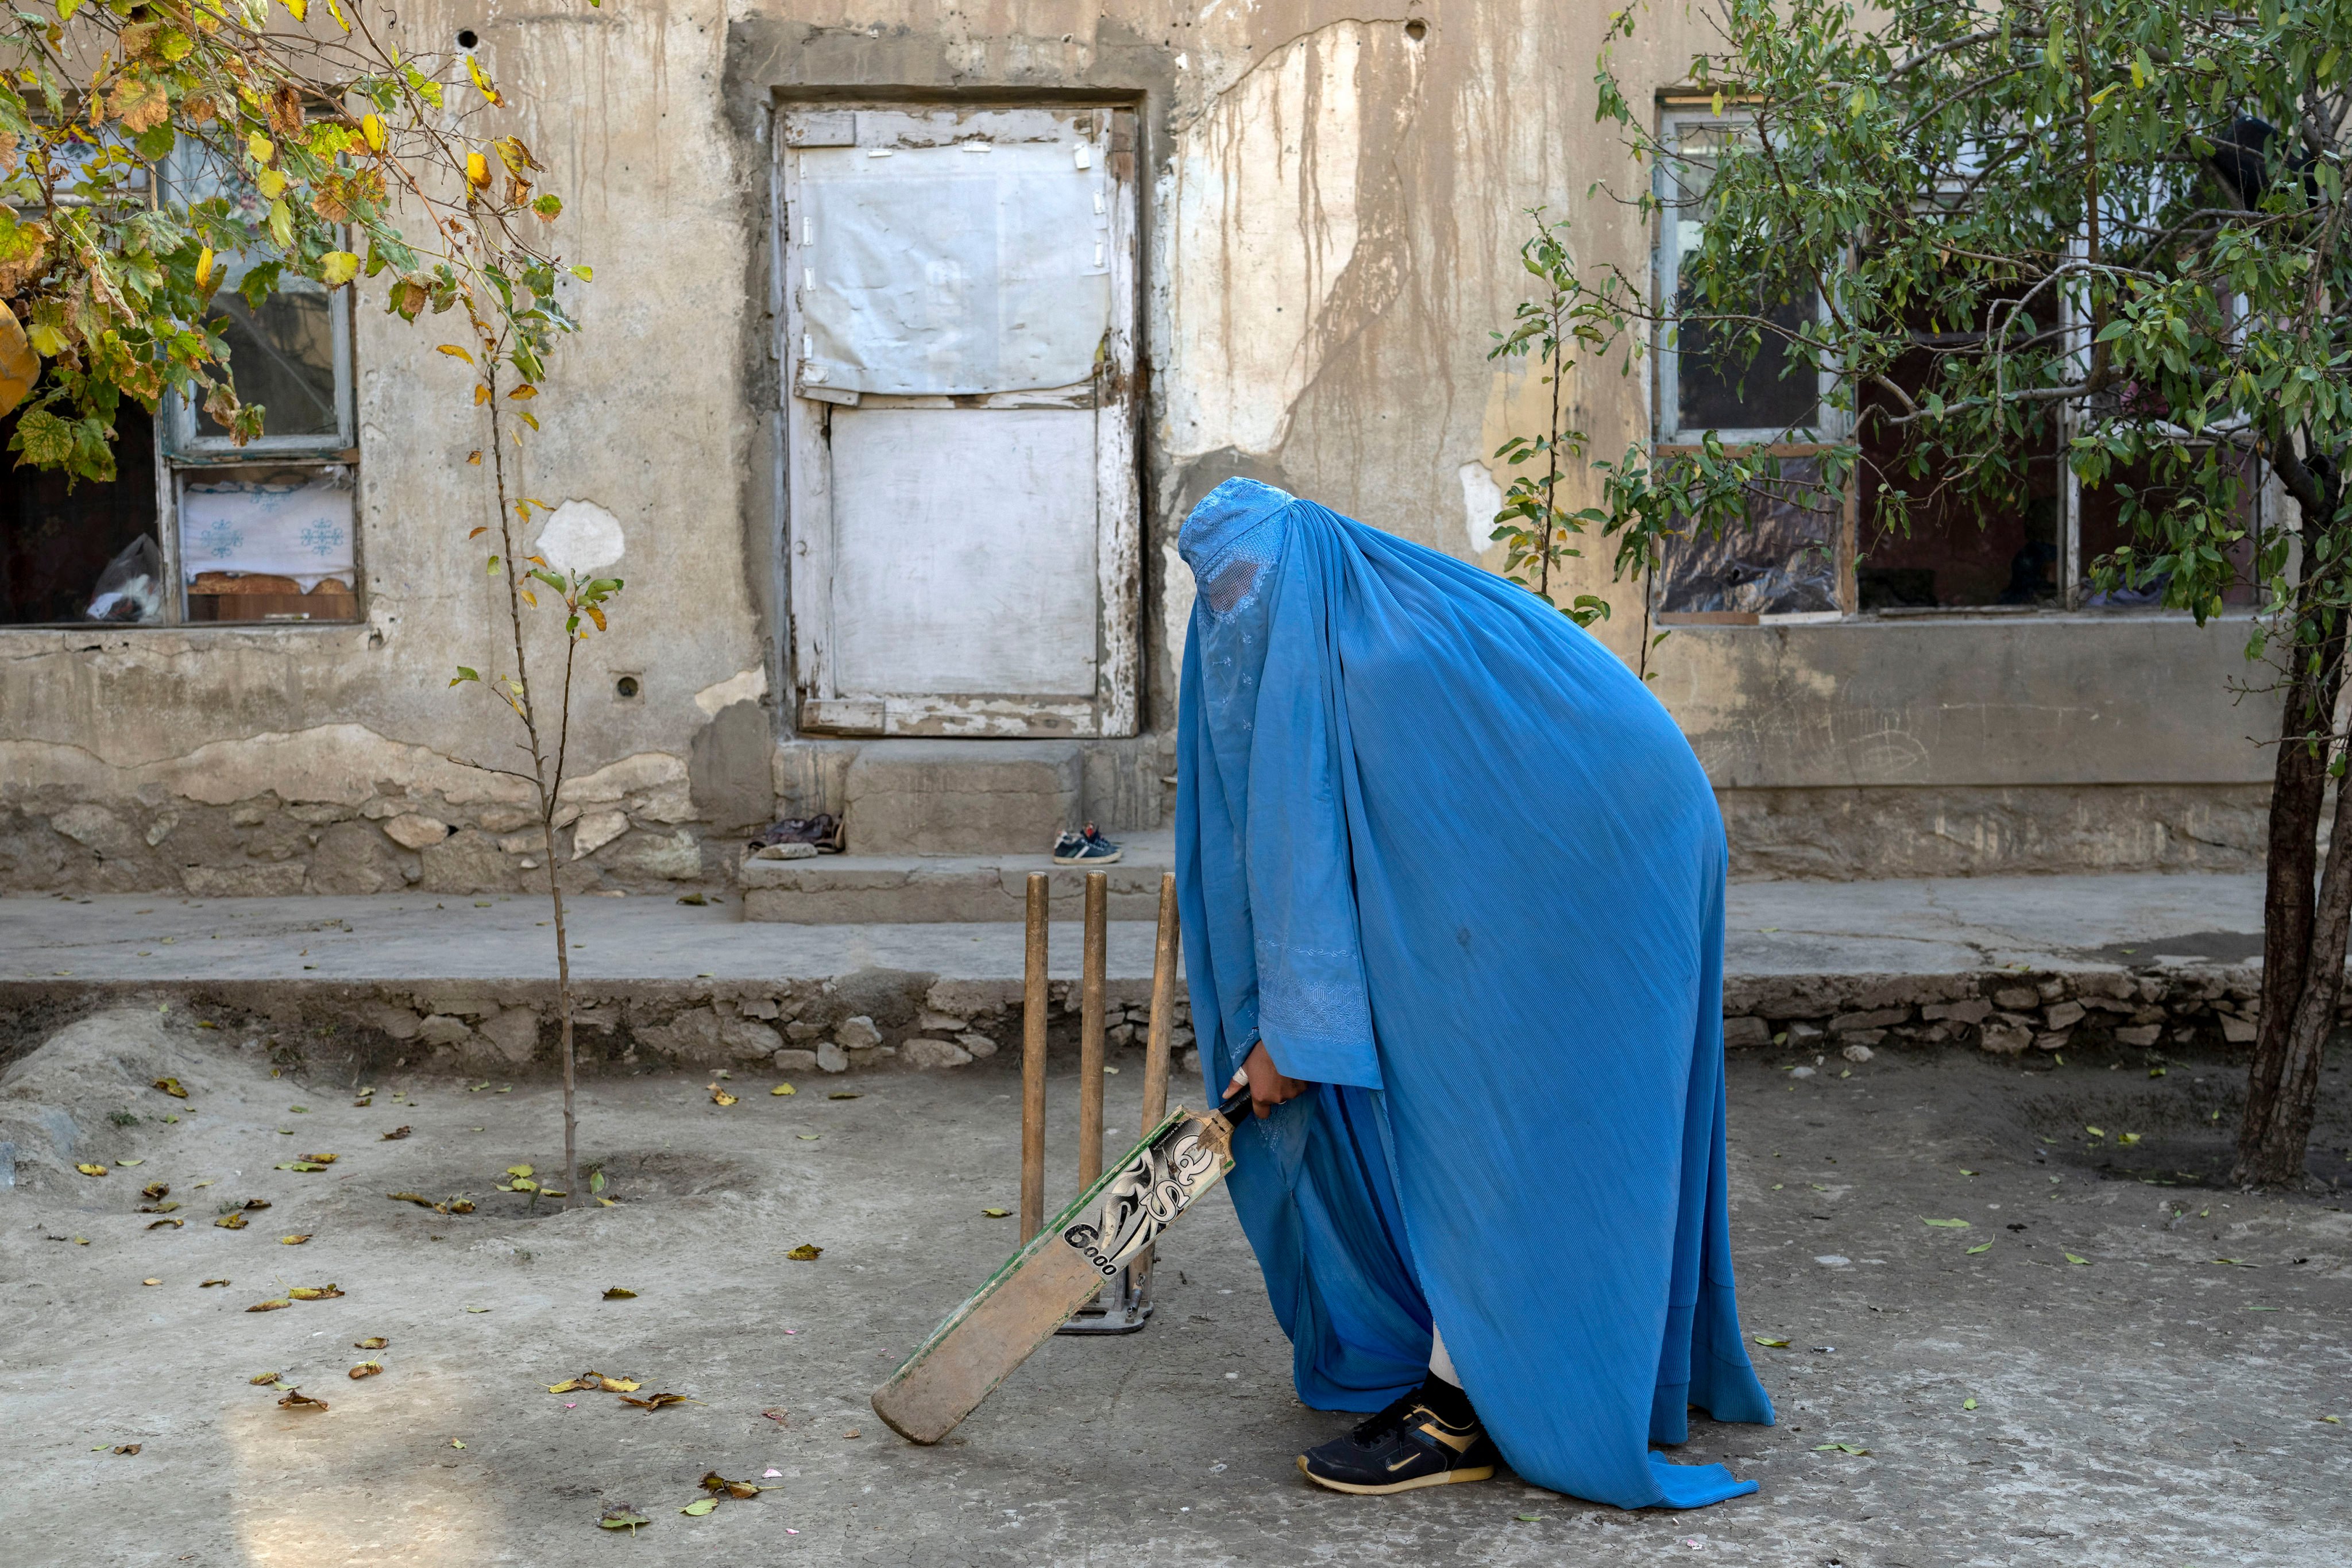 An Afghan woman posing with her cricket bat in Kabul, Afghanistan in 2022. The ruling Taliban have banned women from competitive sports as well as most schooling and many realms of work. Photo: AP